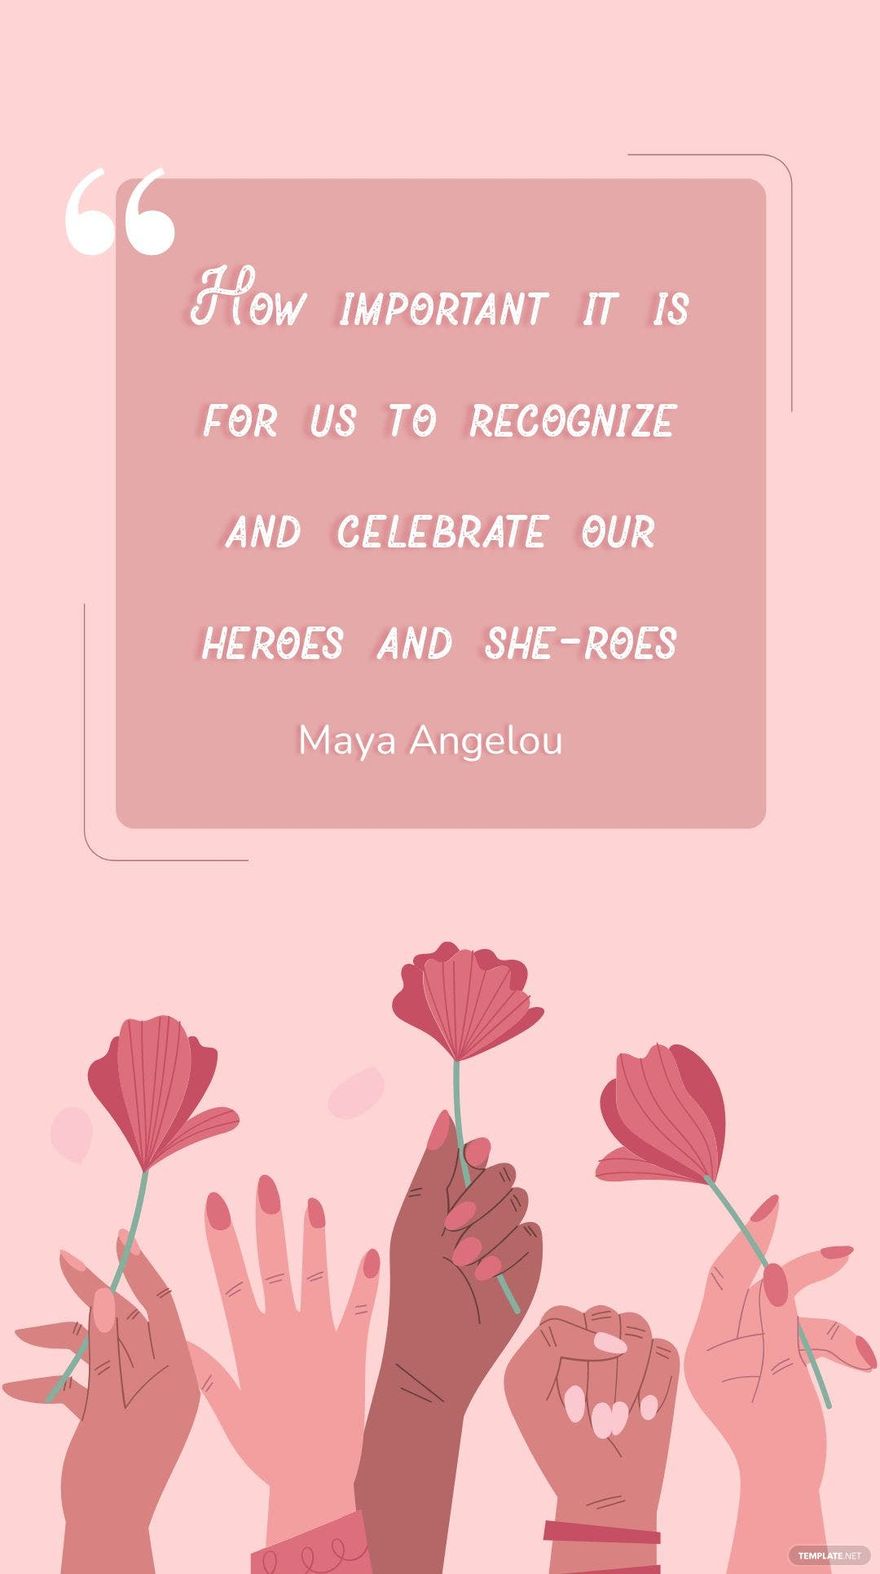 Maya Angelou - How important it is for us to recognize and celebrate our heroes and she-roes